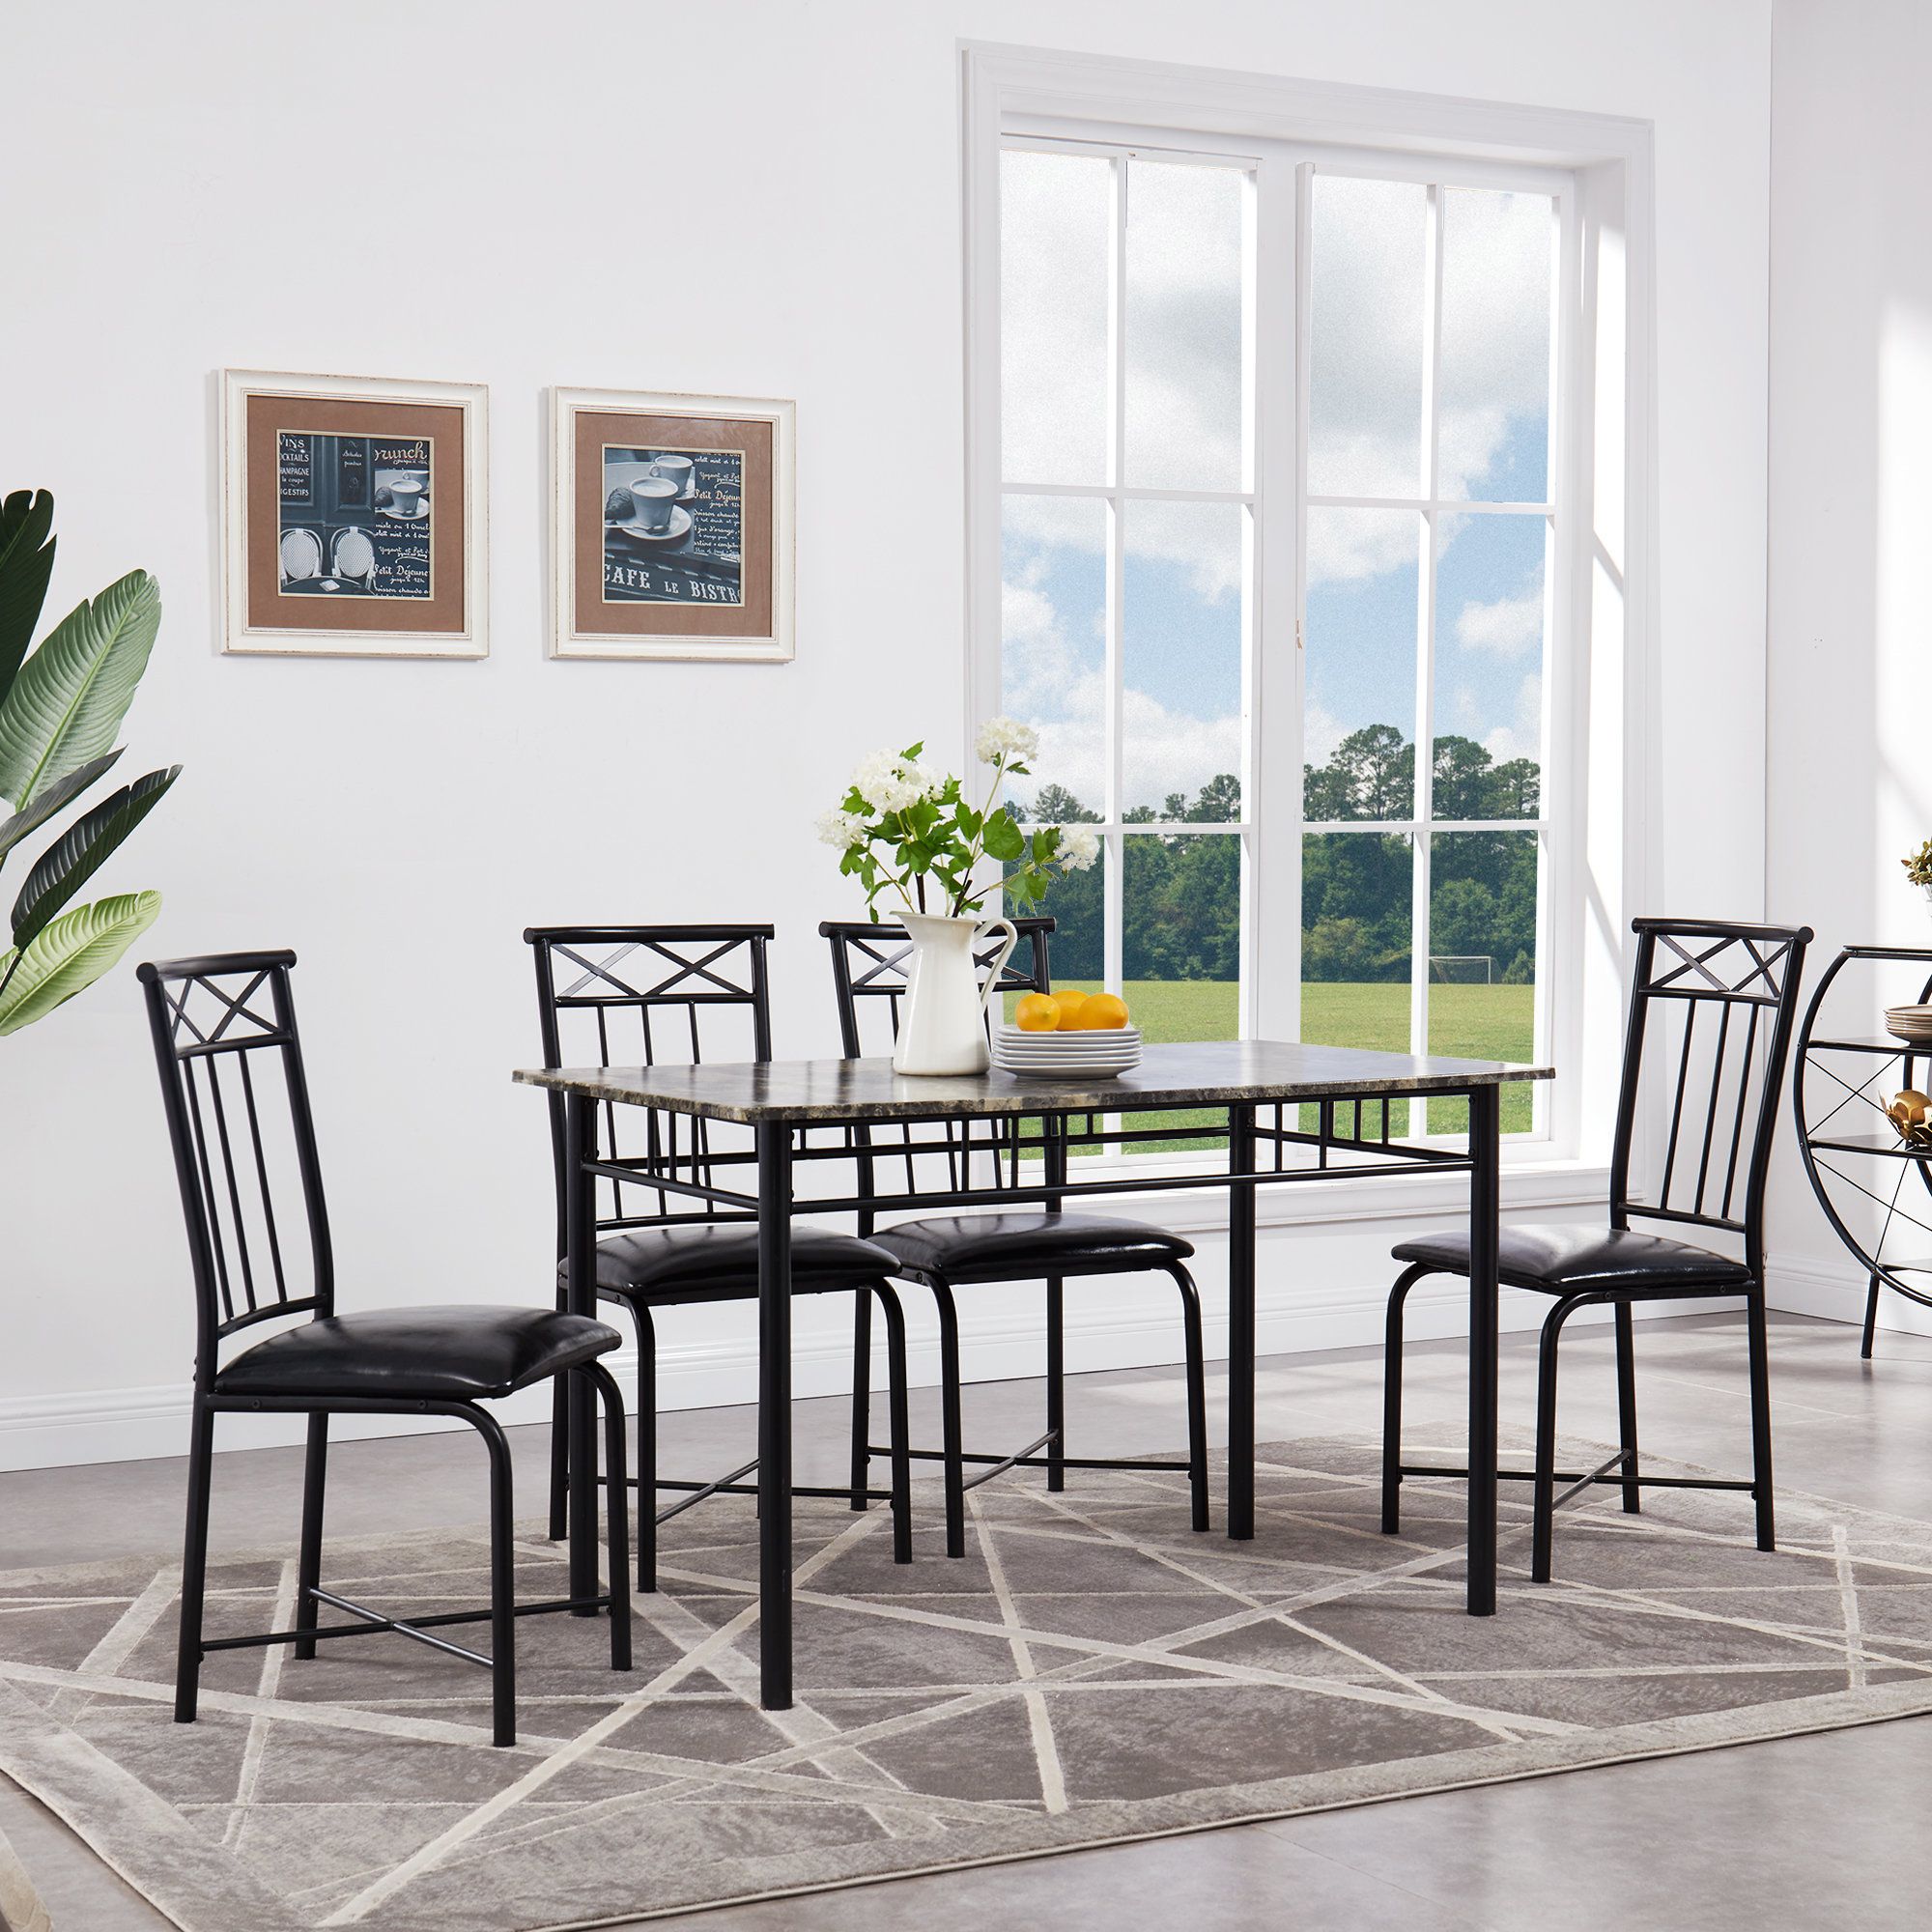 Reinert 5 Piece Dining Set Intended For Most Current Lightle 5 Piece Breakfast Nook Dining Sets (View 7 of 20)